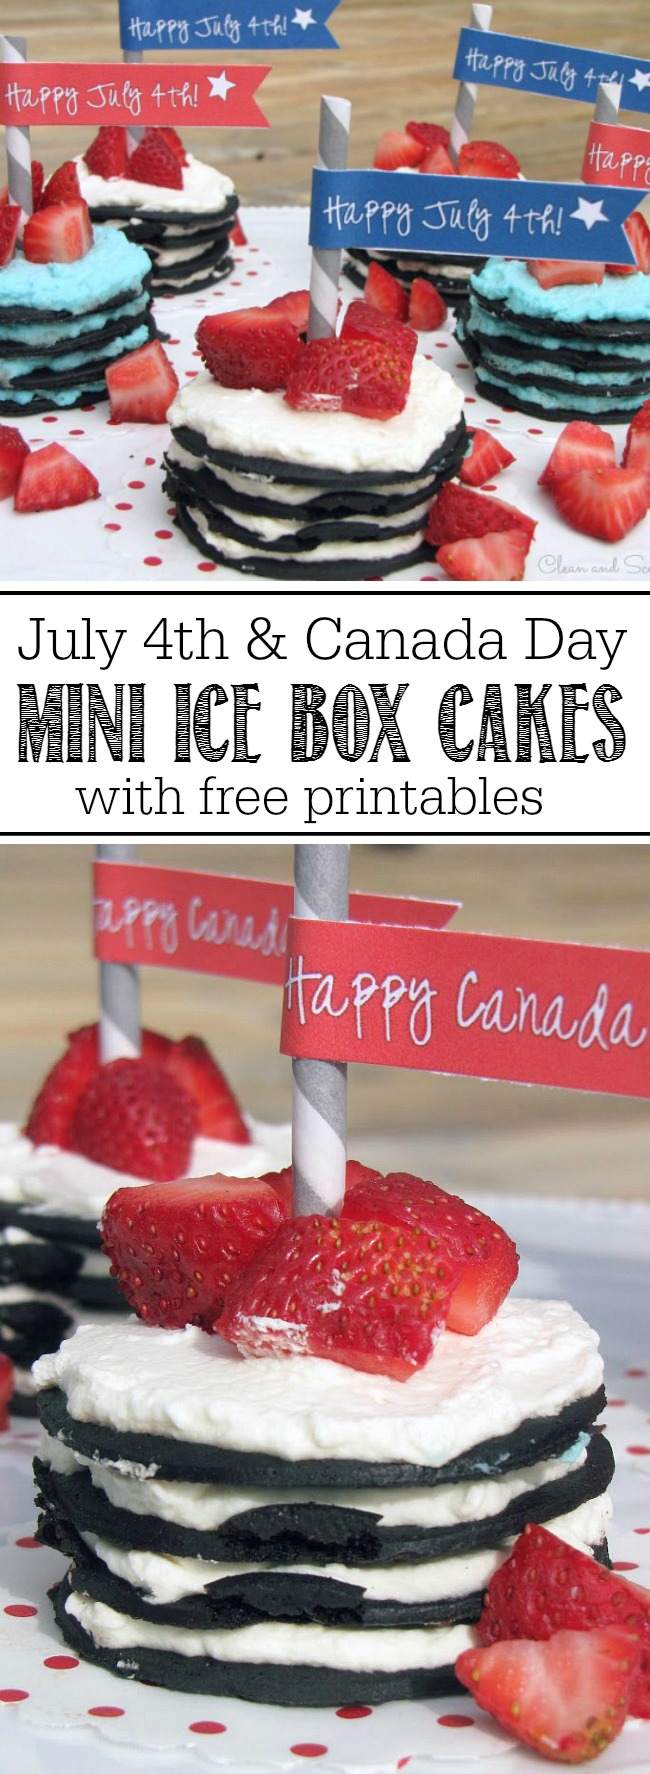 These mini ice box cakes are such a fun and easy dessert idea for July 4th or Canada Day. Free printable flags included too!